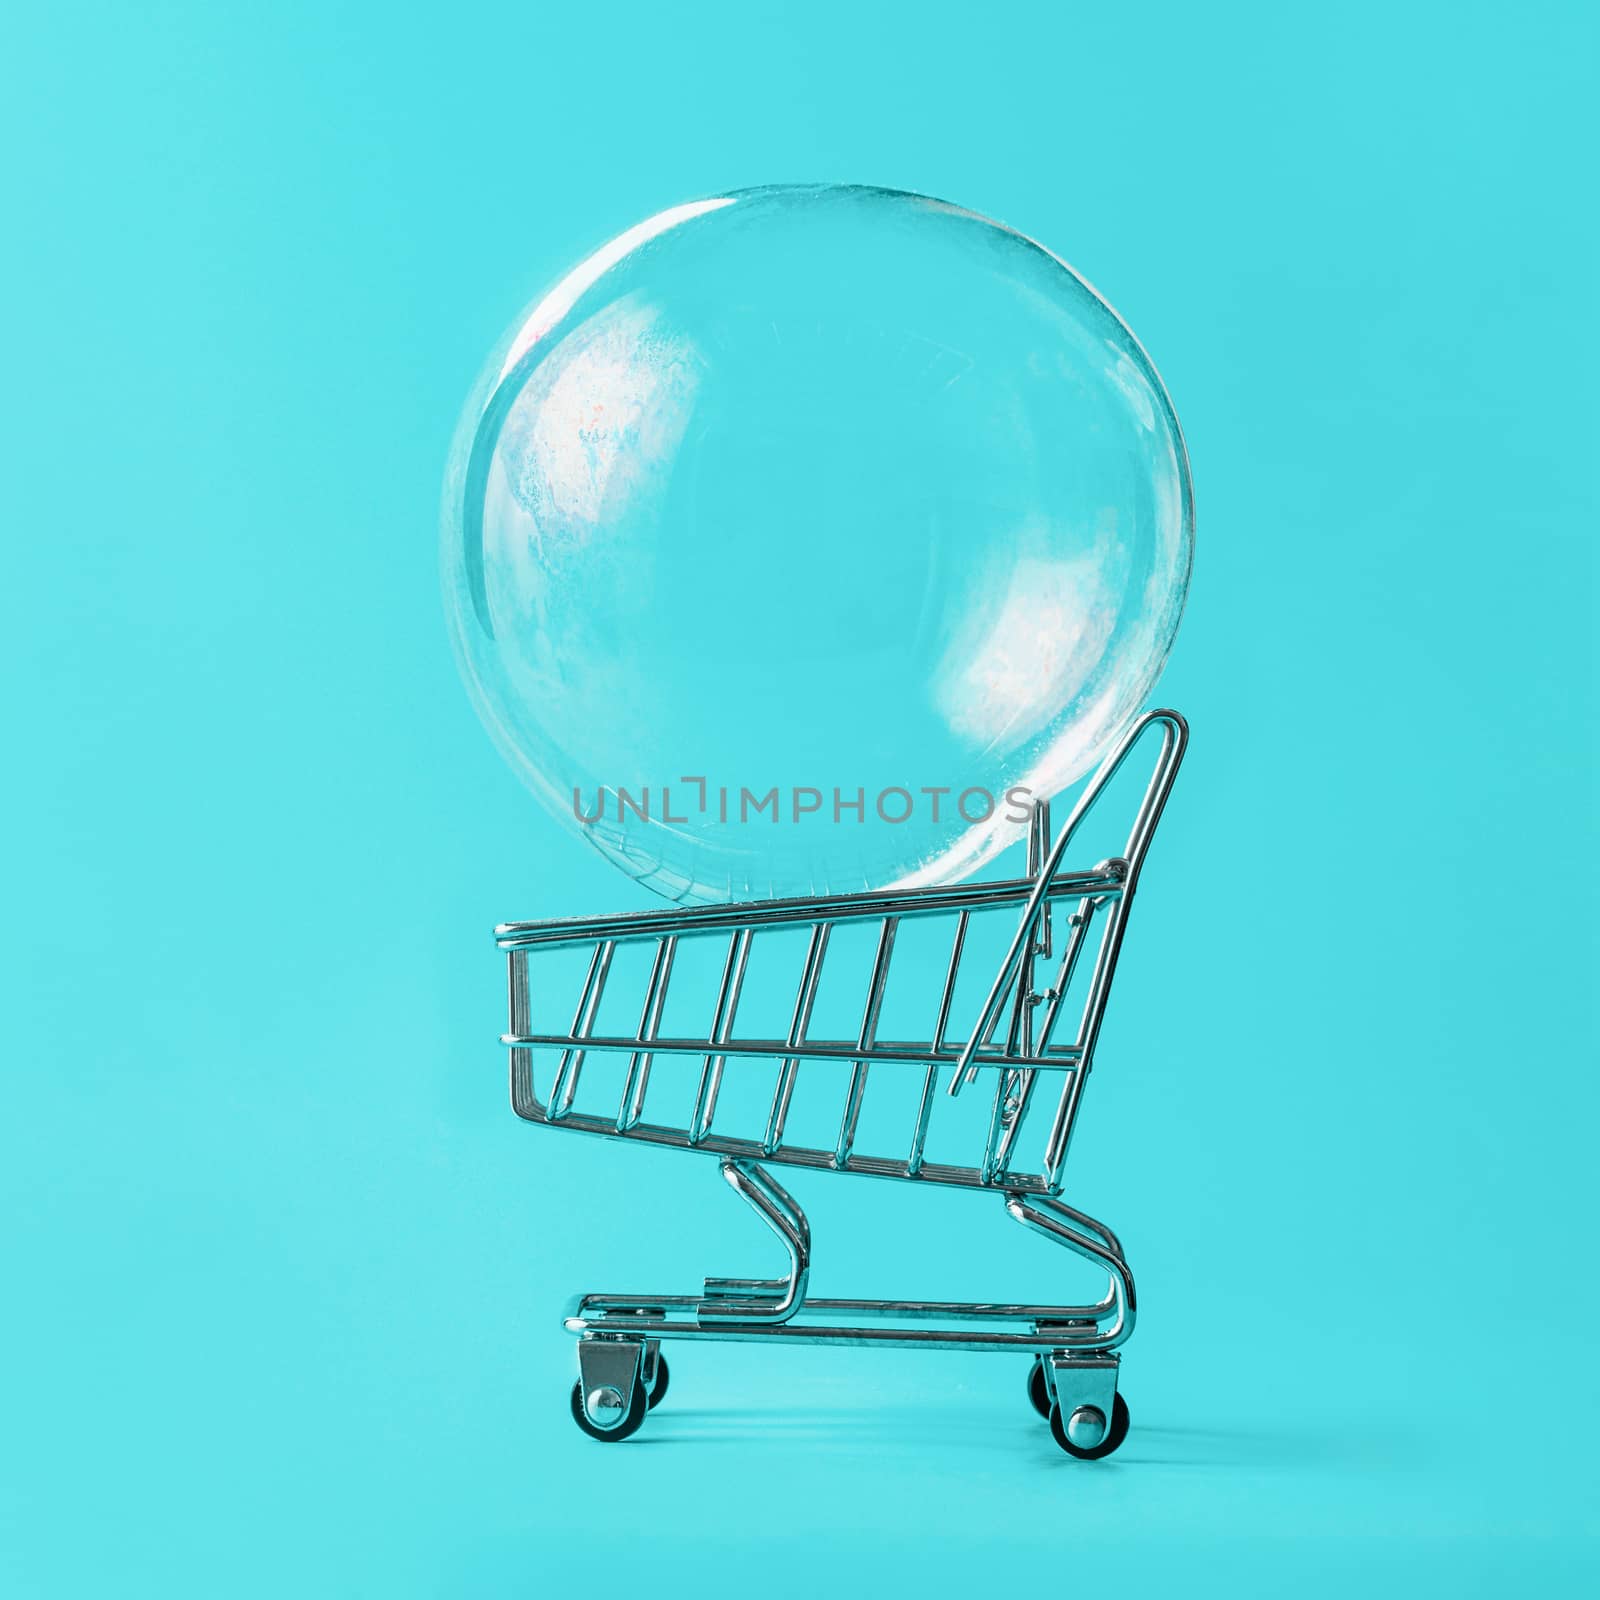 Shopping cart with soap bubble on bright blue background. Ephemeral happiness from shopping, shopaholism, consumerism concept. Shopping concept, minimalist creative layout